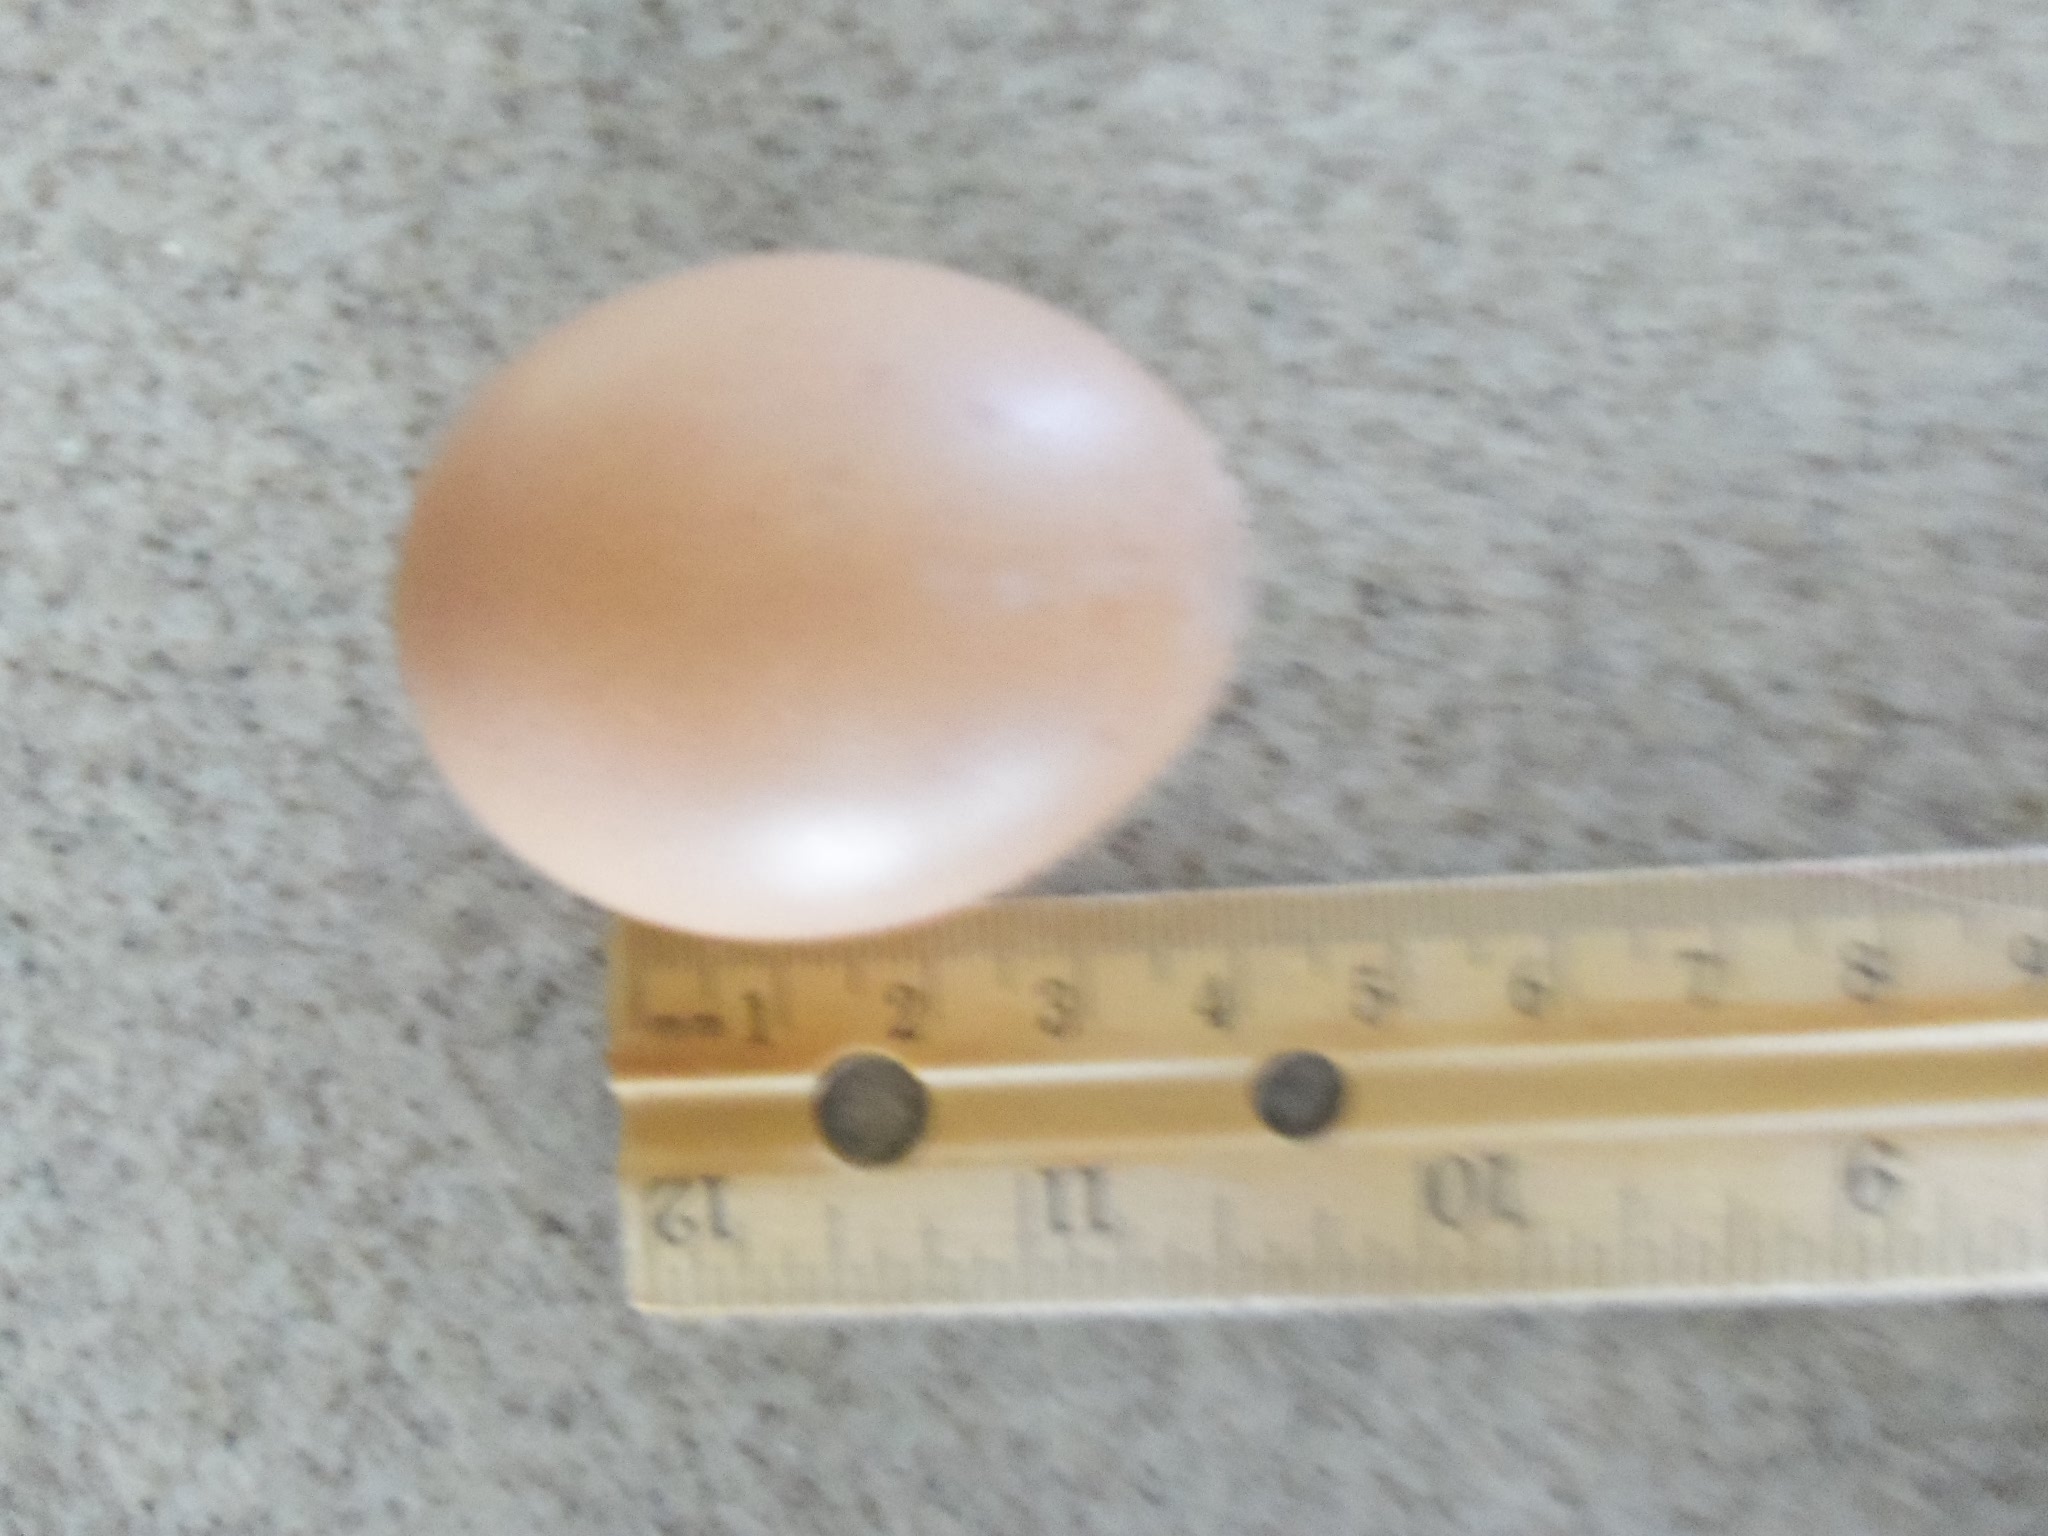 Eggnog's first egg 4 months early.